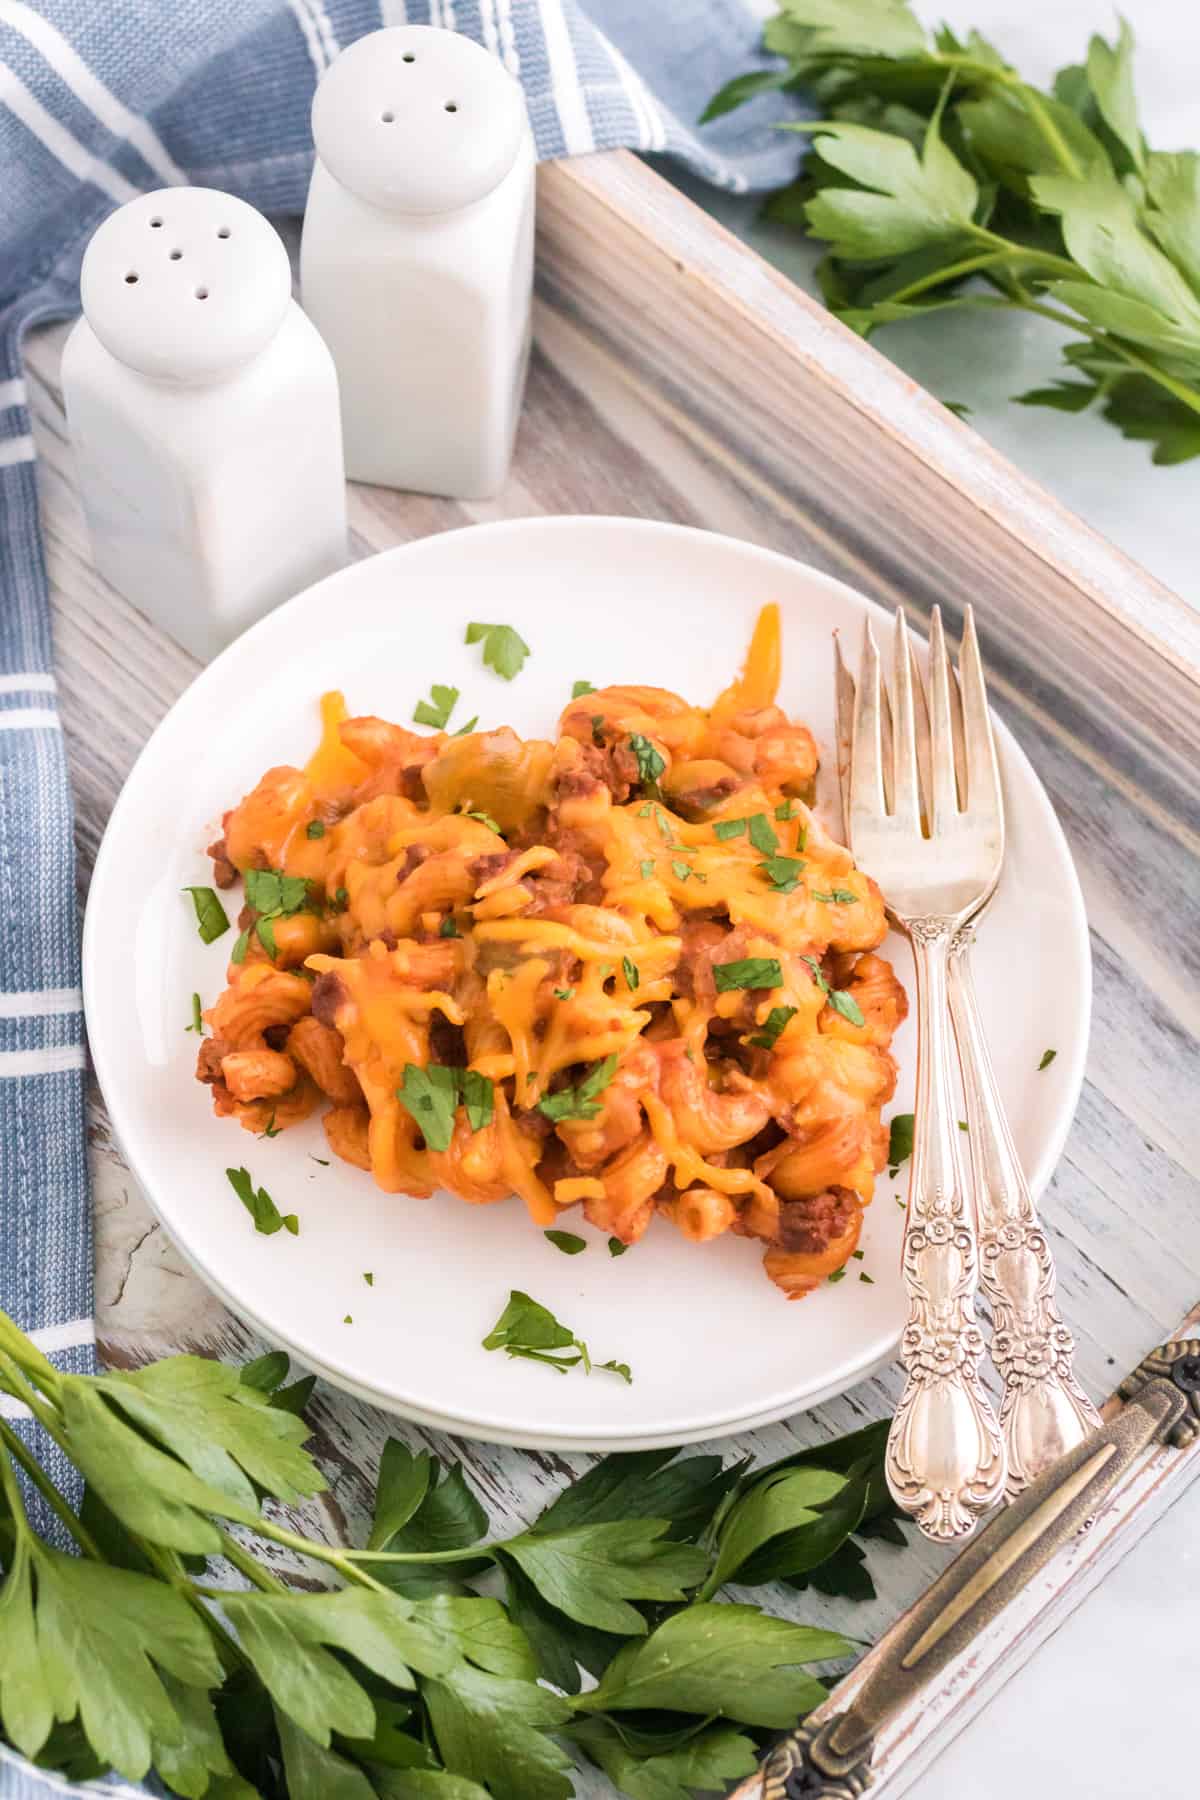 Sloppy Joe Pasta Bake served on a white plate and garnished with fresh parsley.